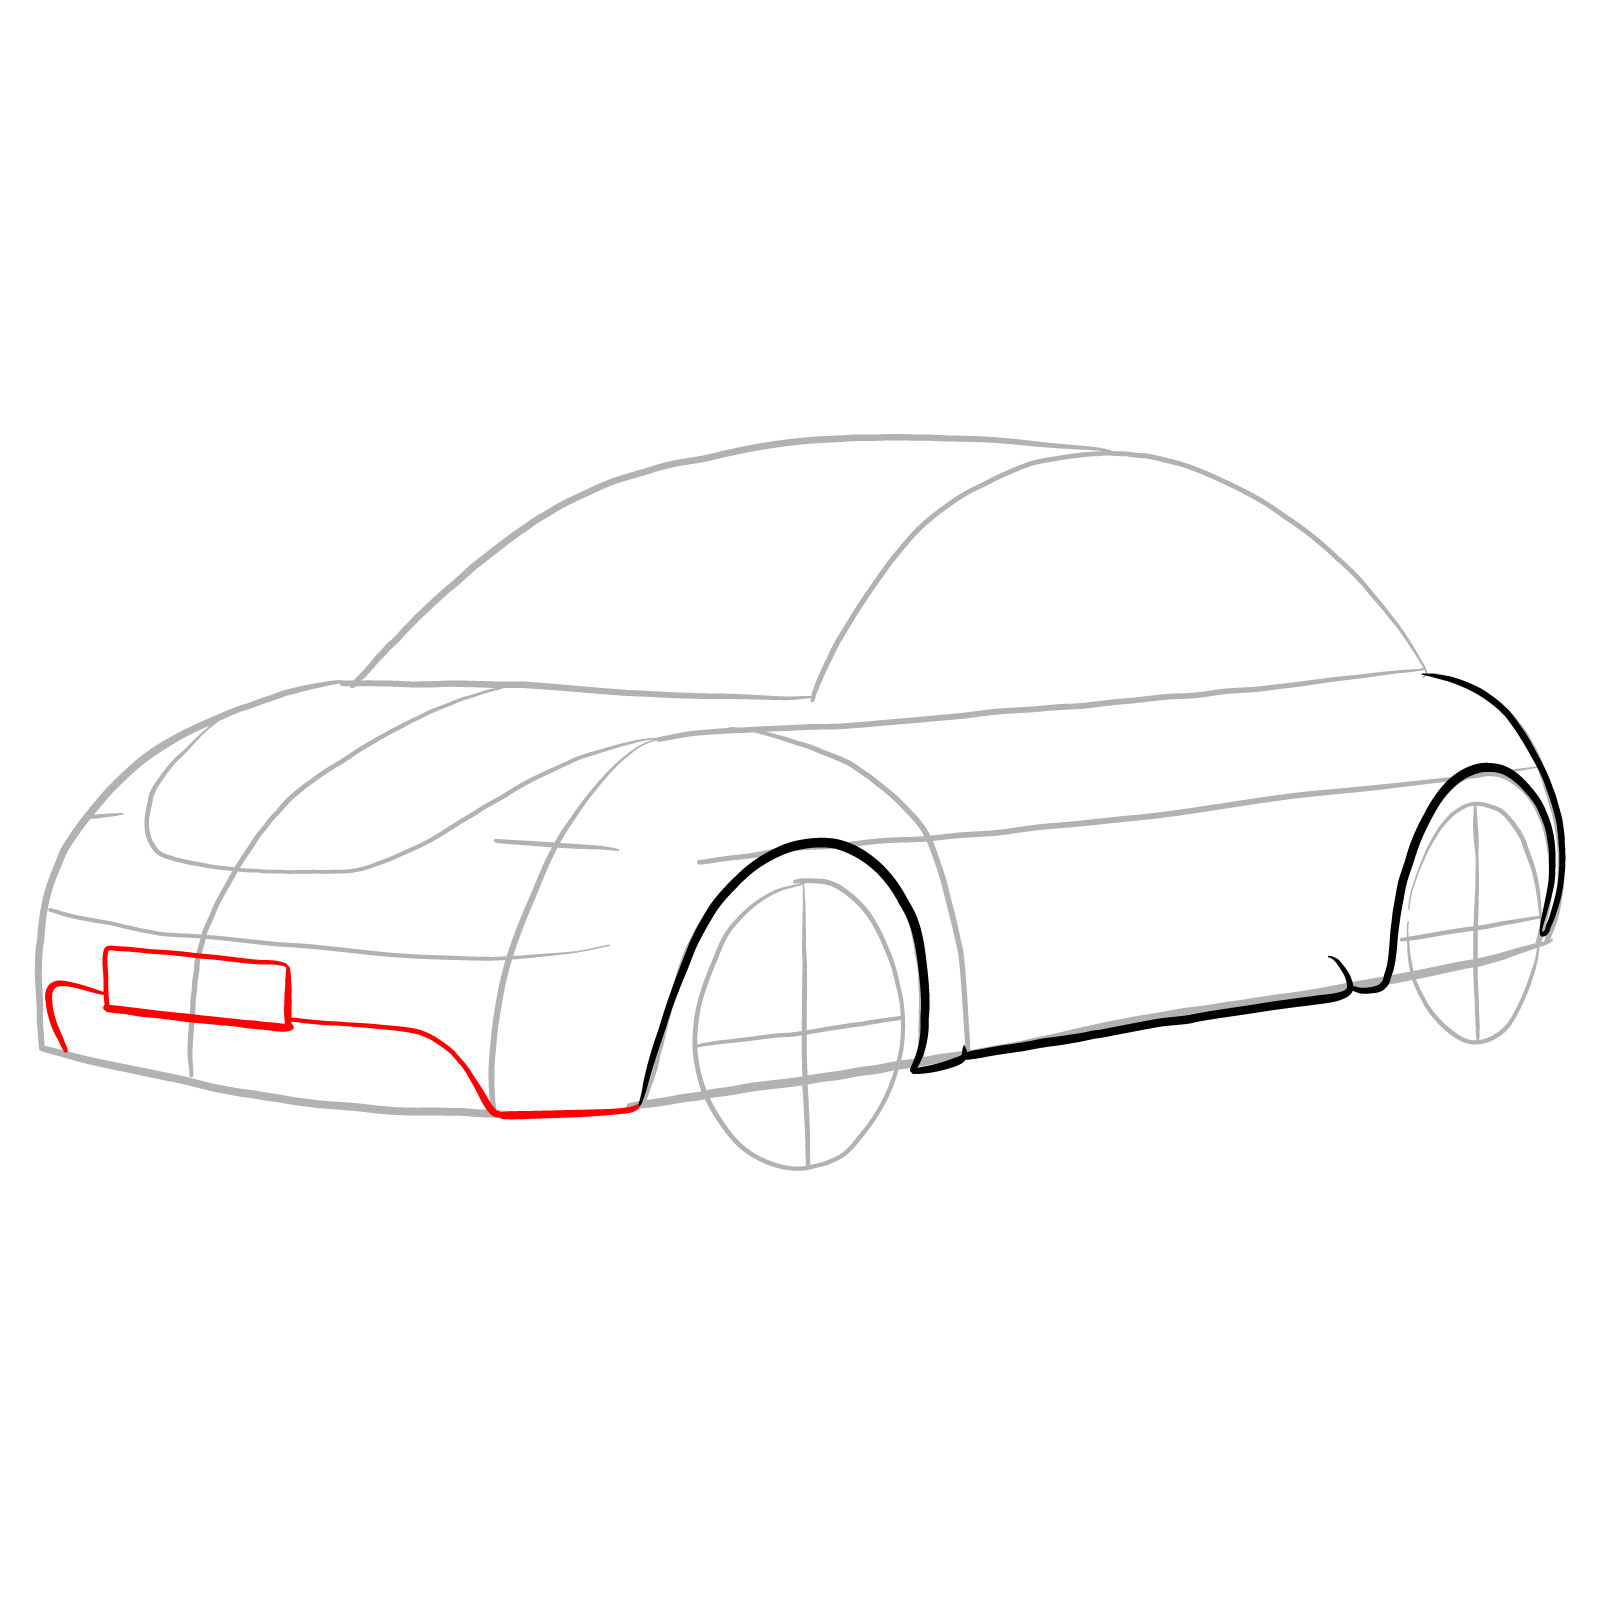 How to draw Volkswagen New Beetle - step 08